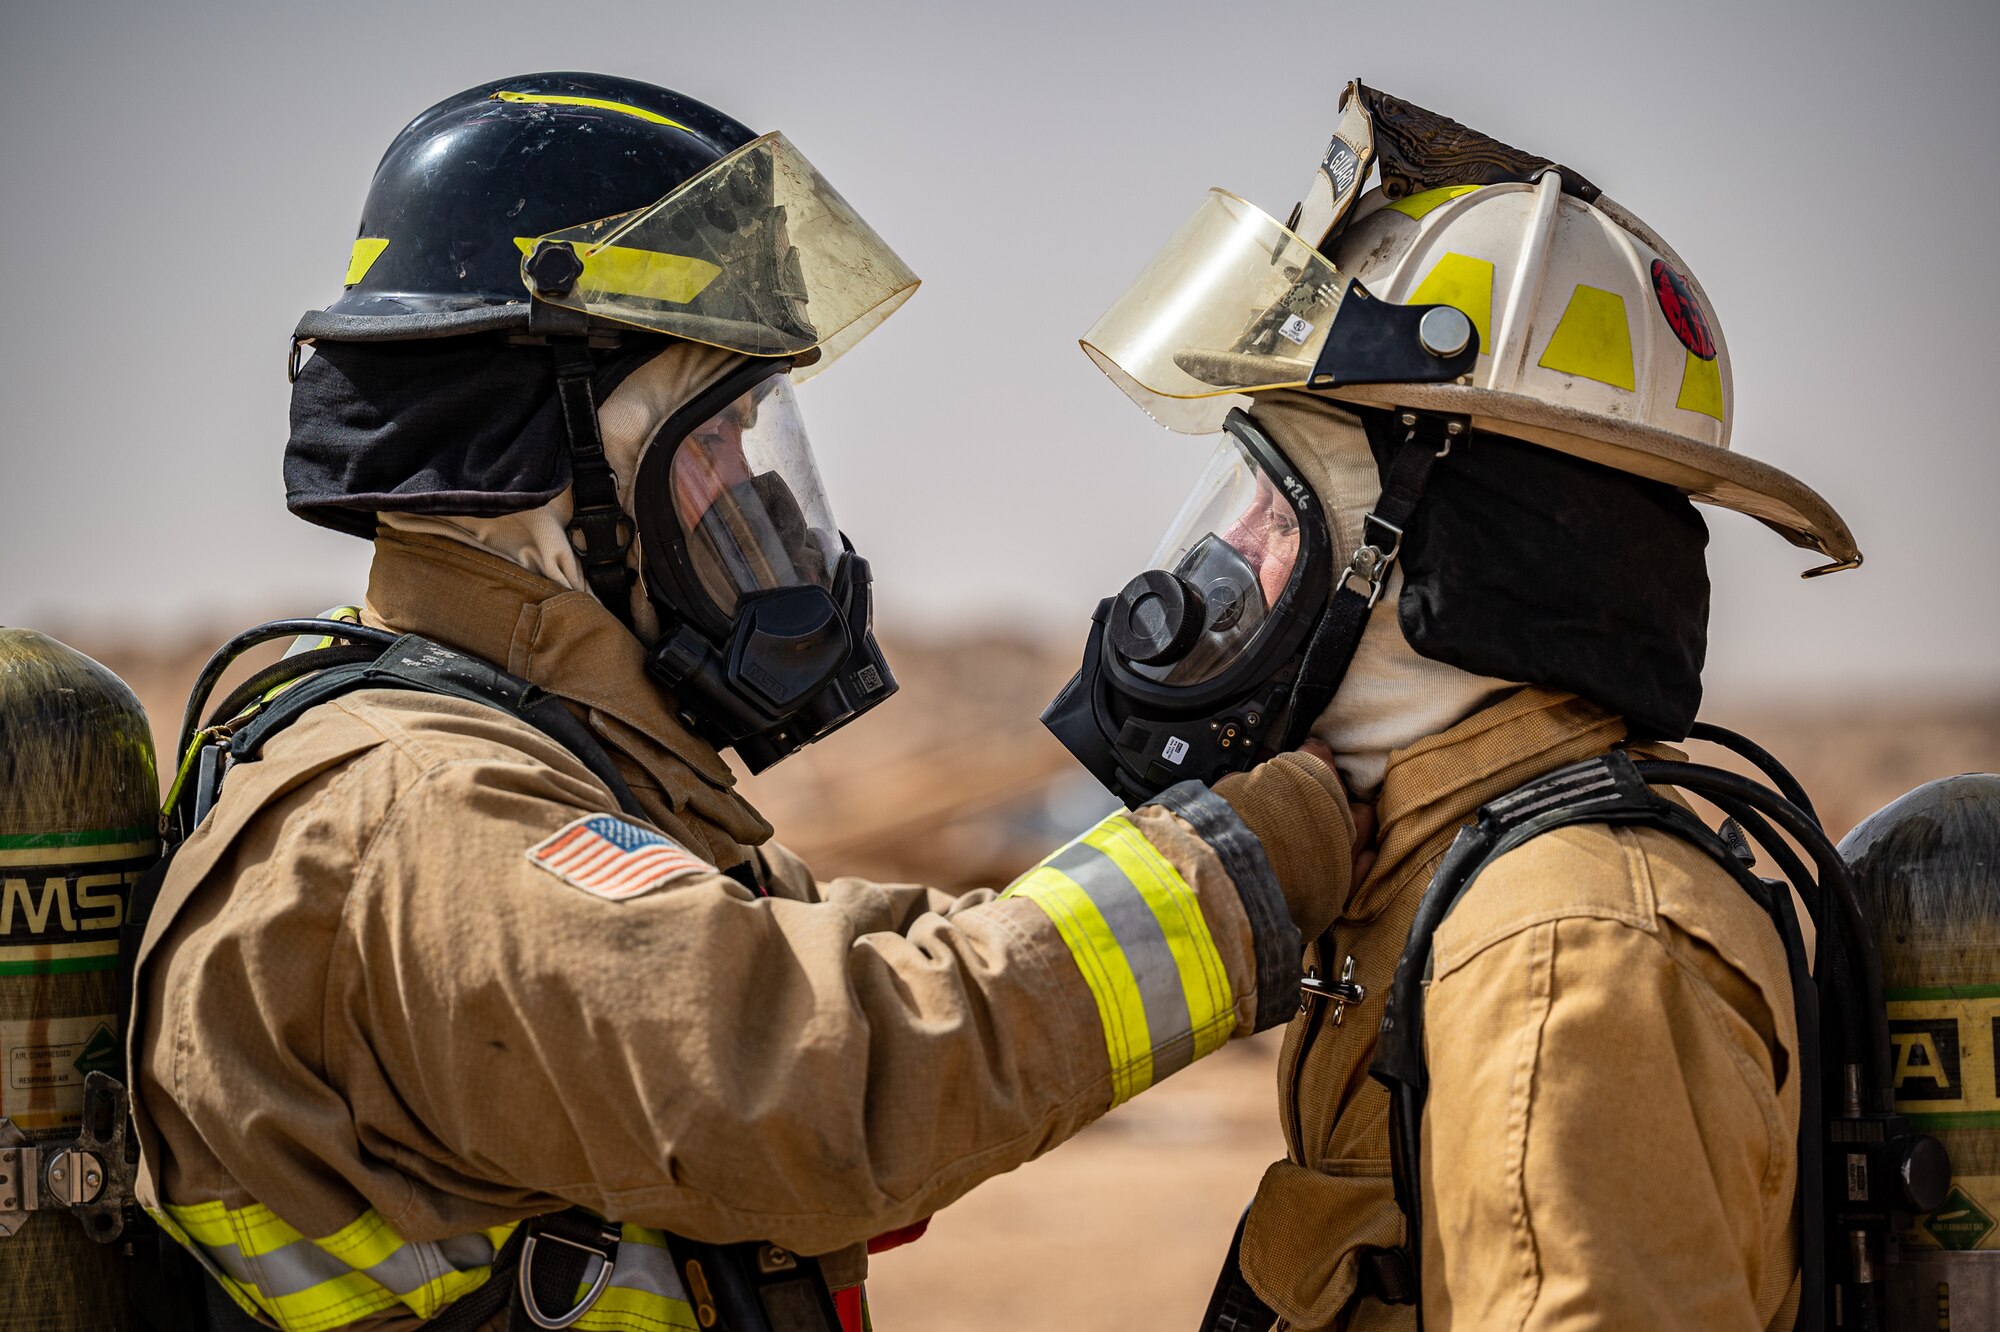 A 332d Expeditionary Civil Engineer Squadron firefighter inspects Lt. Col. Lee Turcottte, 332d ECES commander, as part of the buddy check process during live-fire flashover training at an undisclosed location in Southwest Asia, April 30, 2022. (U.S. Air Force photo by Master Sgt. Christopher Parr)